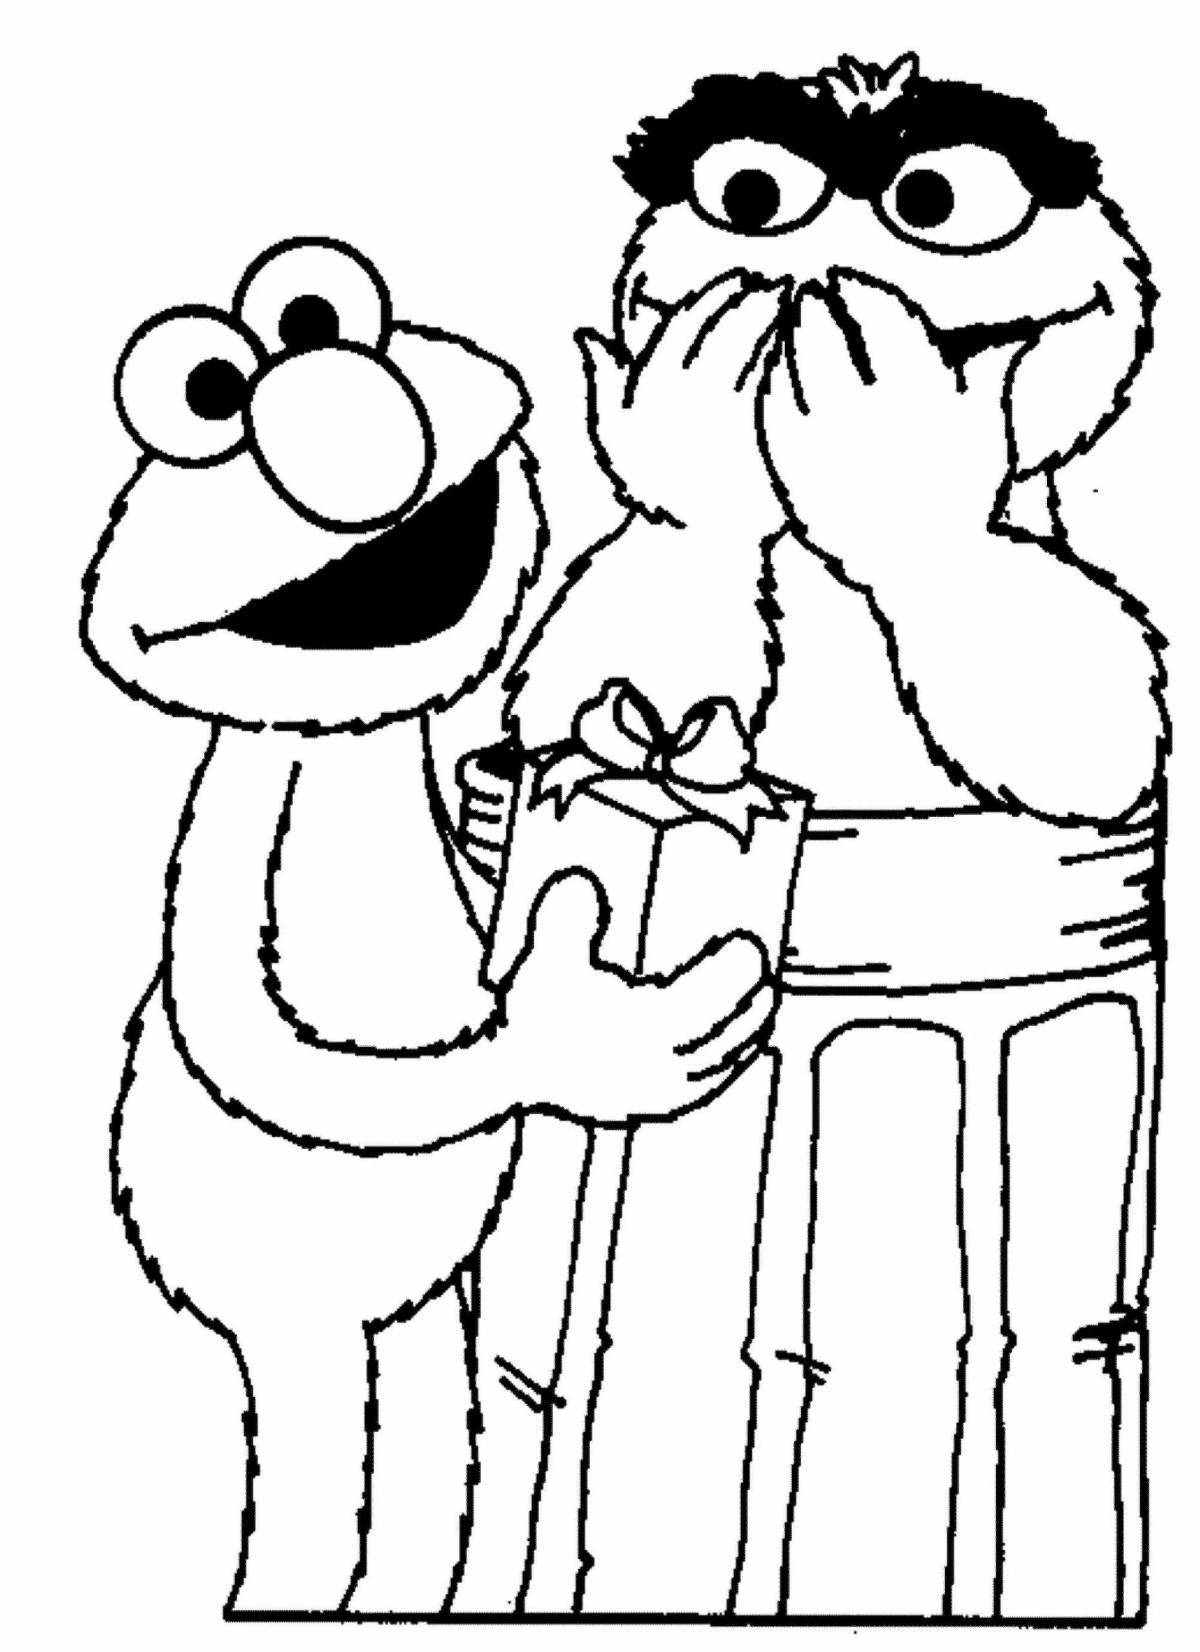 Colorful elmo coloring page